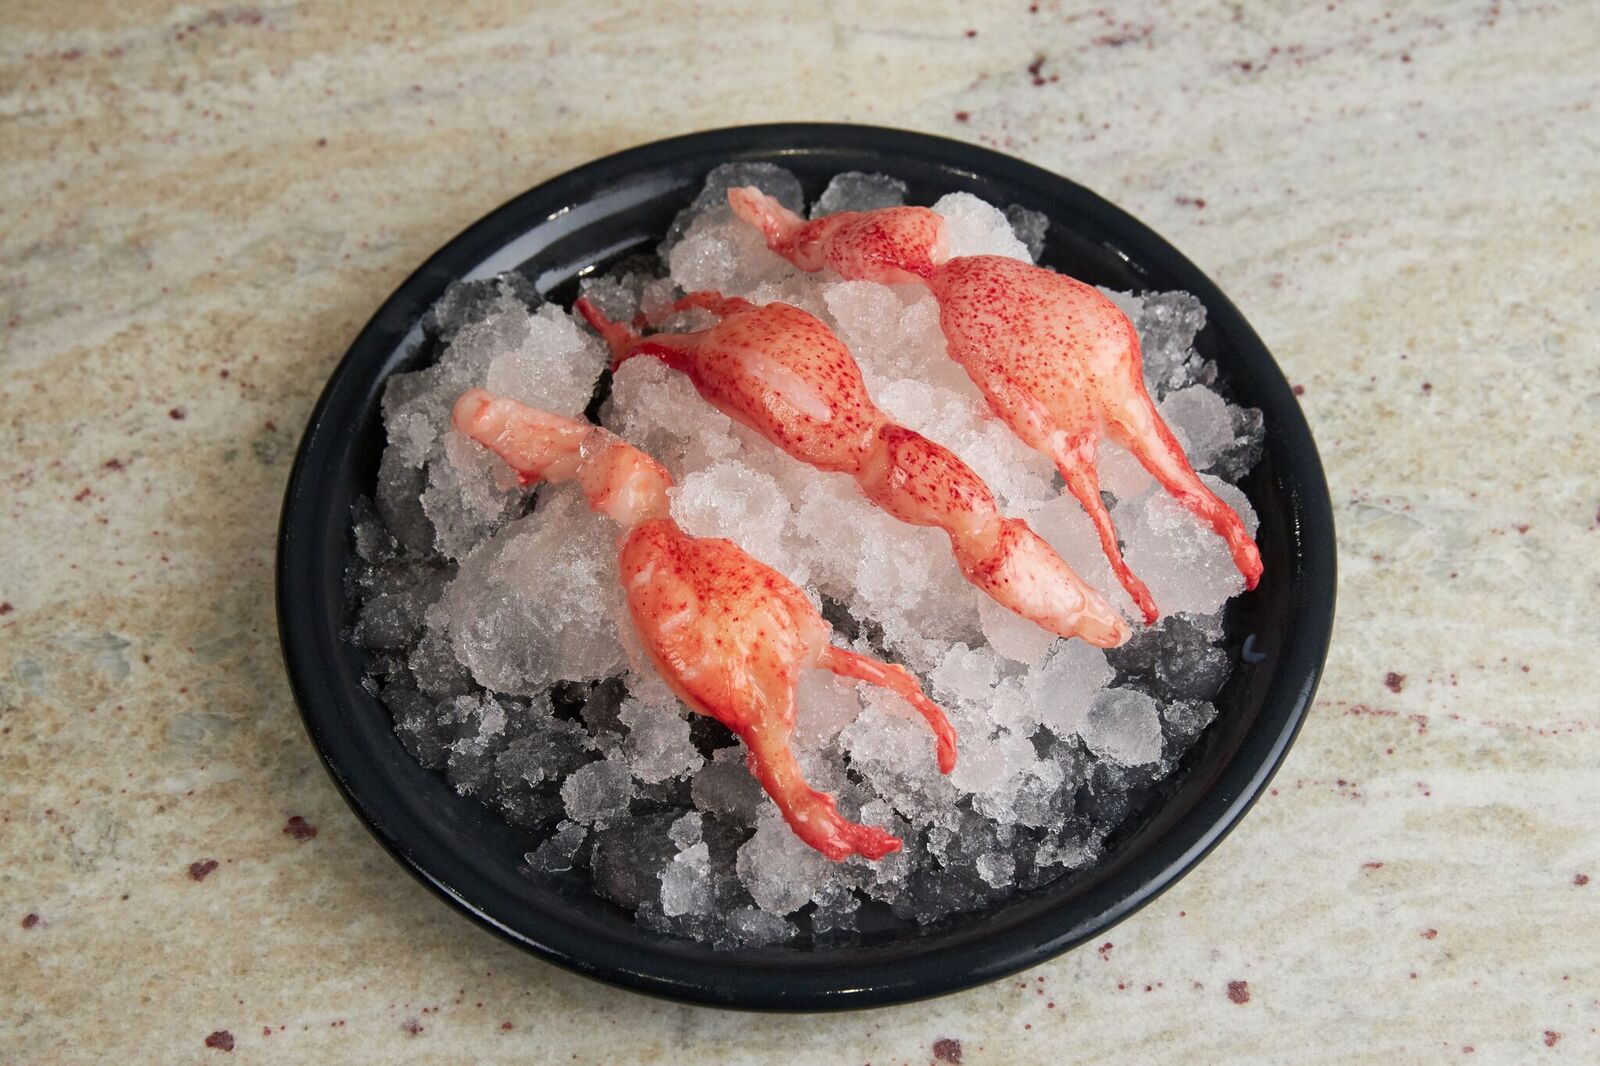 Item of the Day: Raw Lobster Meat